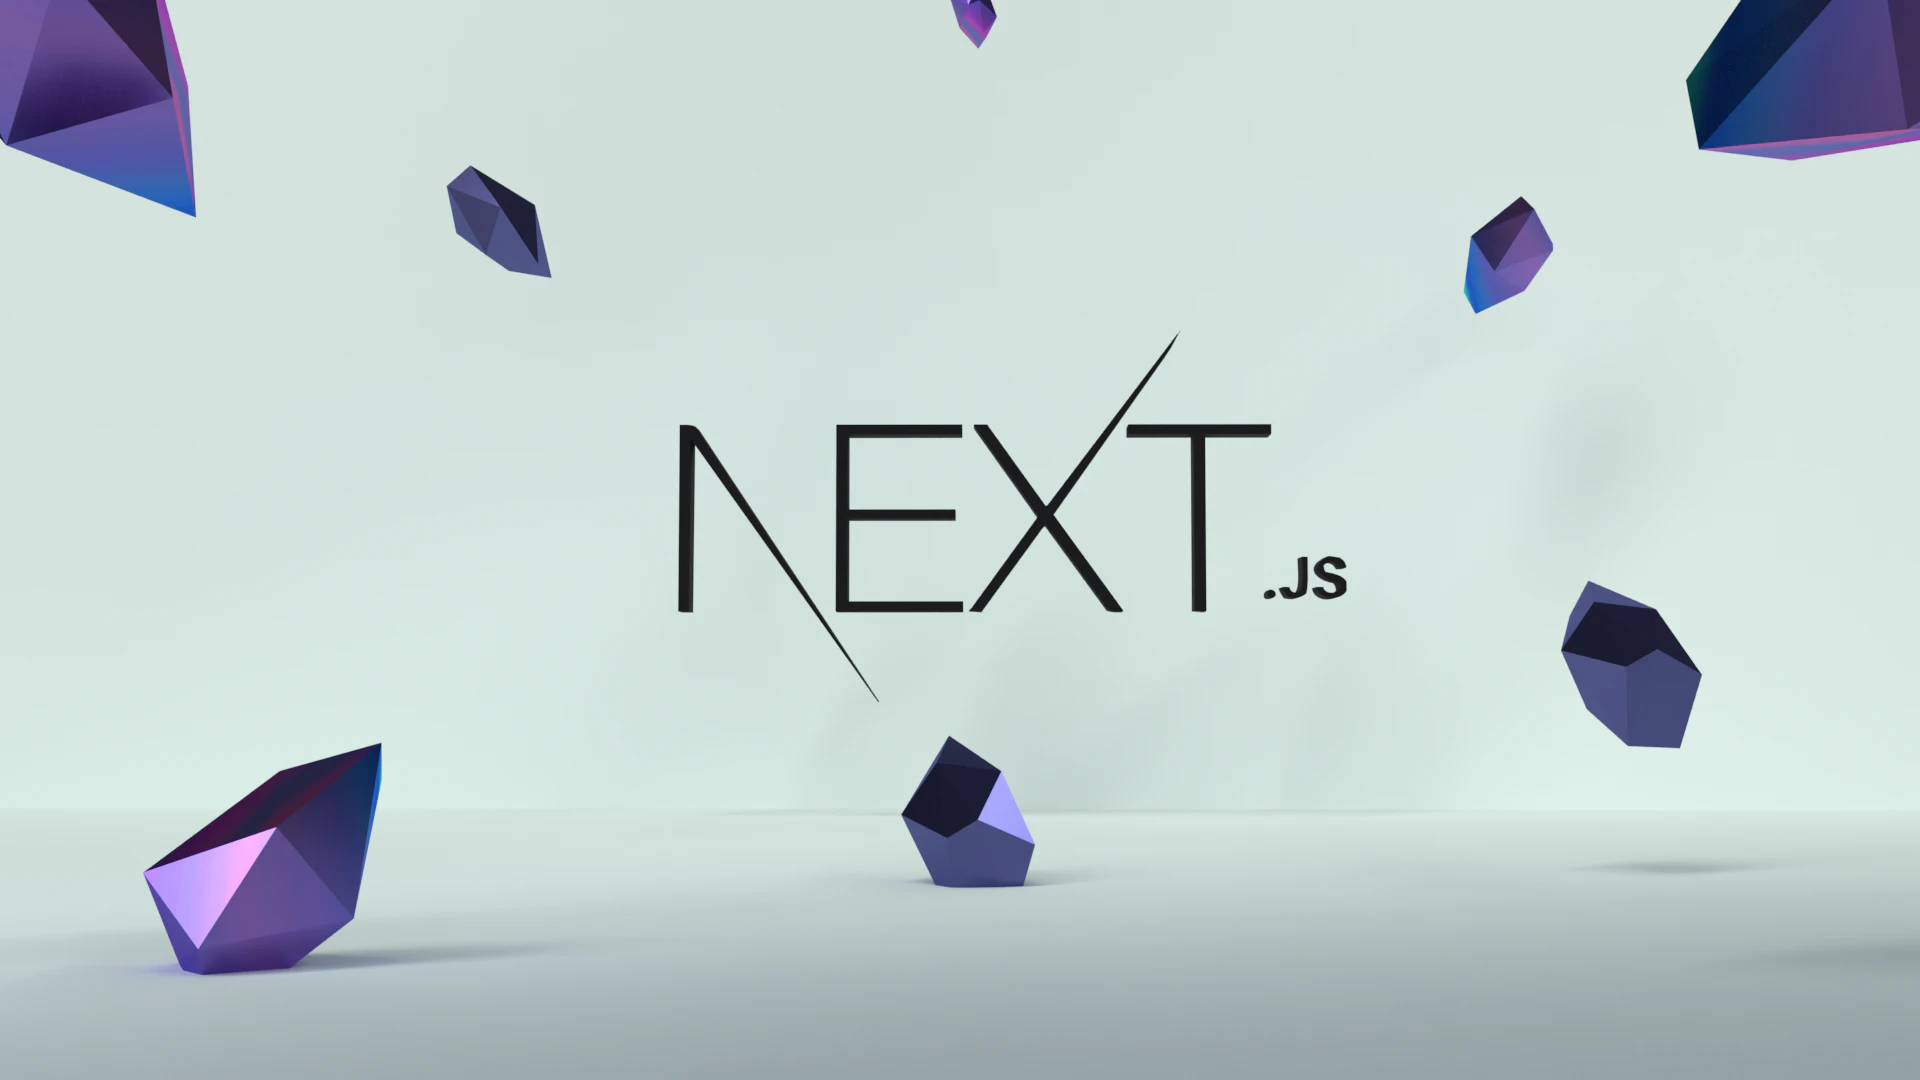 an image showing the next.js logo and some purple diamonds